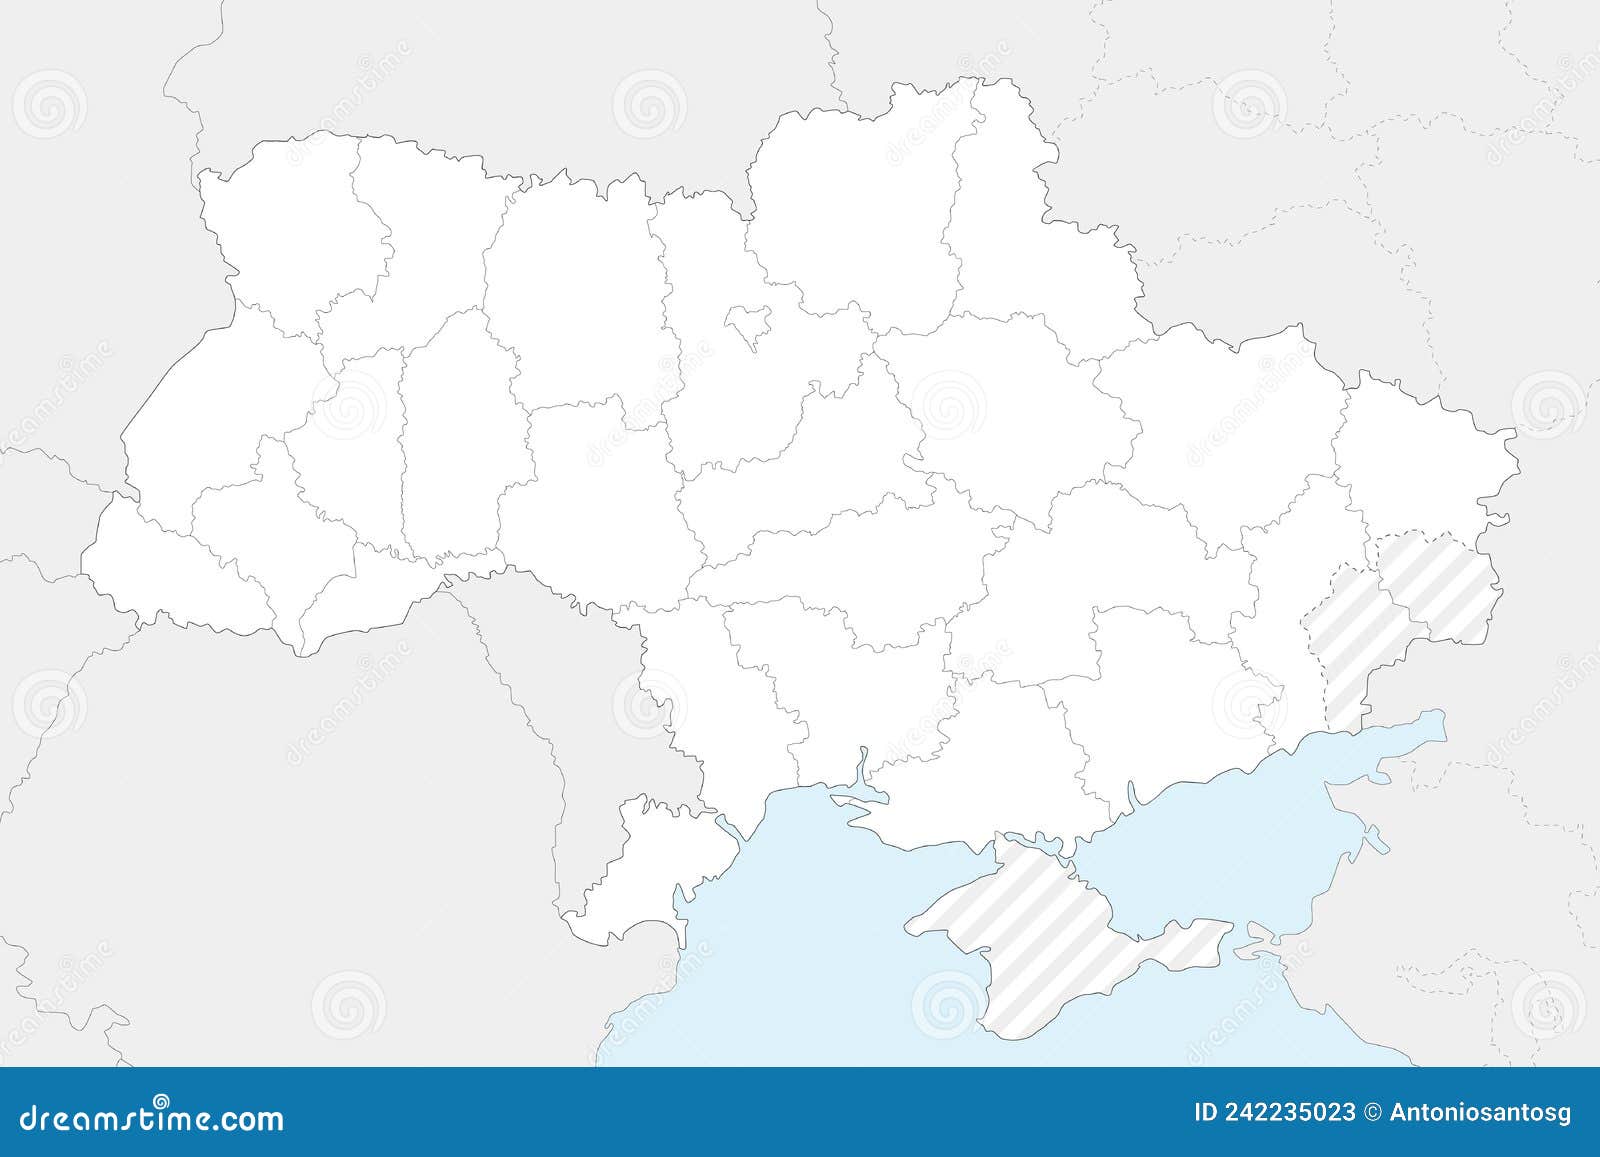 blank map of ukraine with regions, administrative divisions and territories claimed by russia